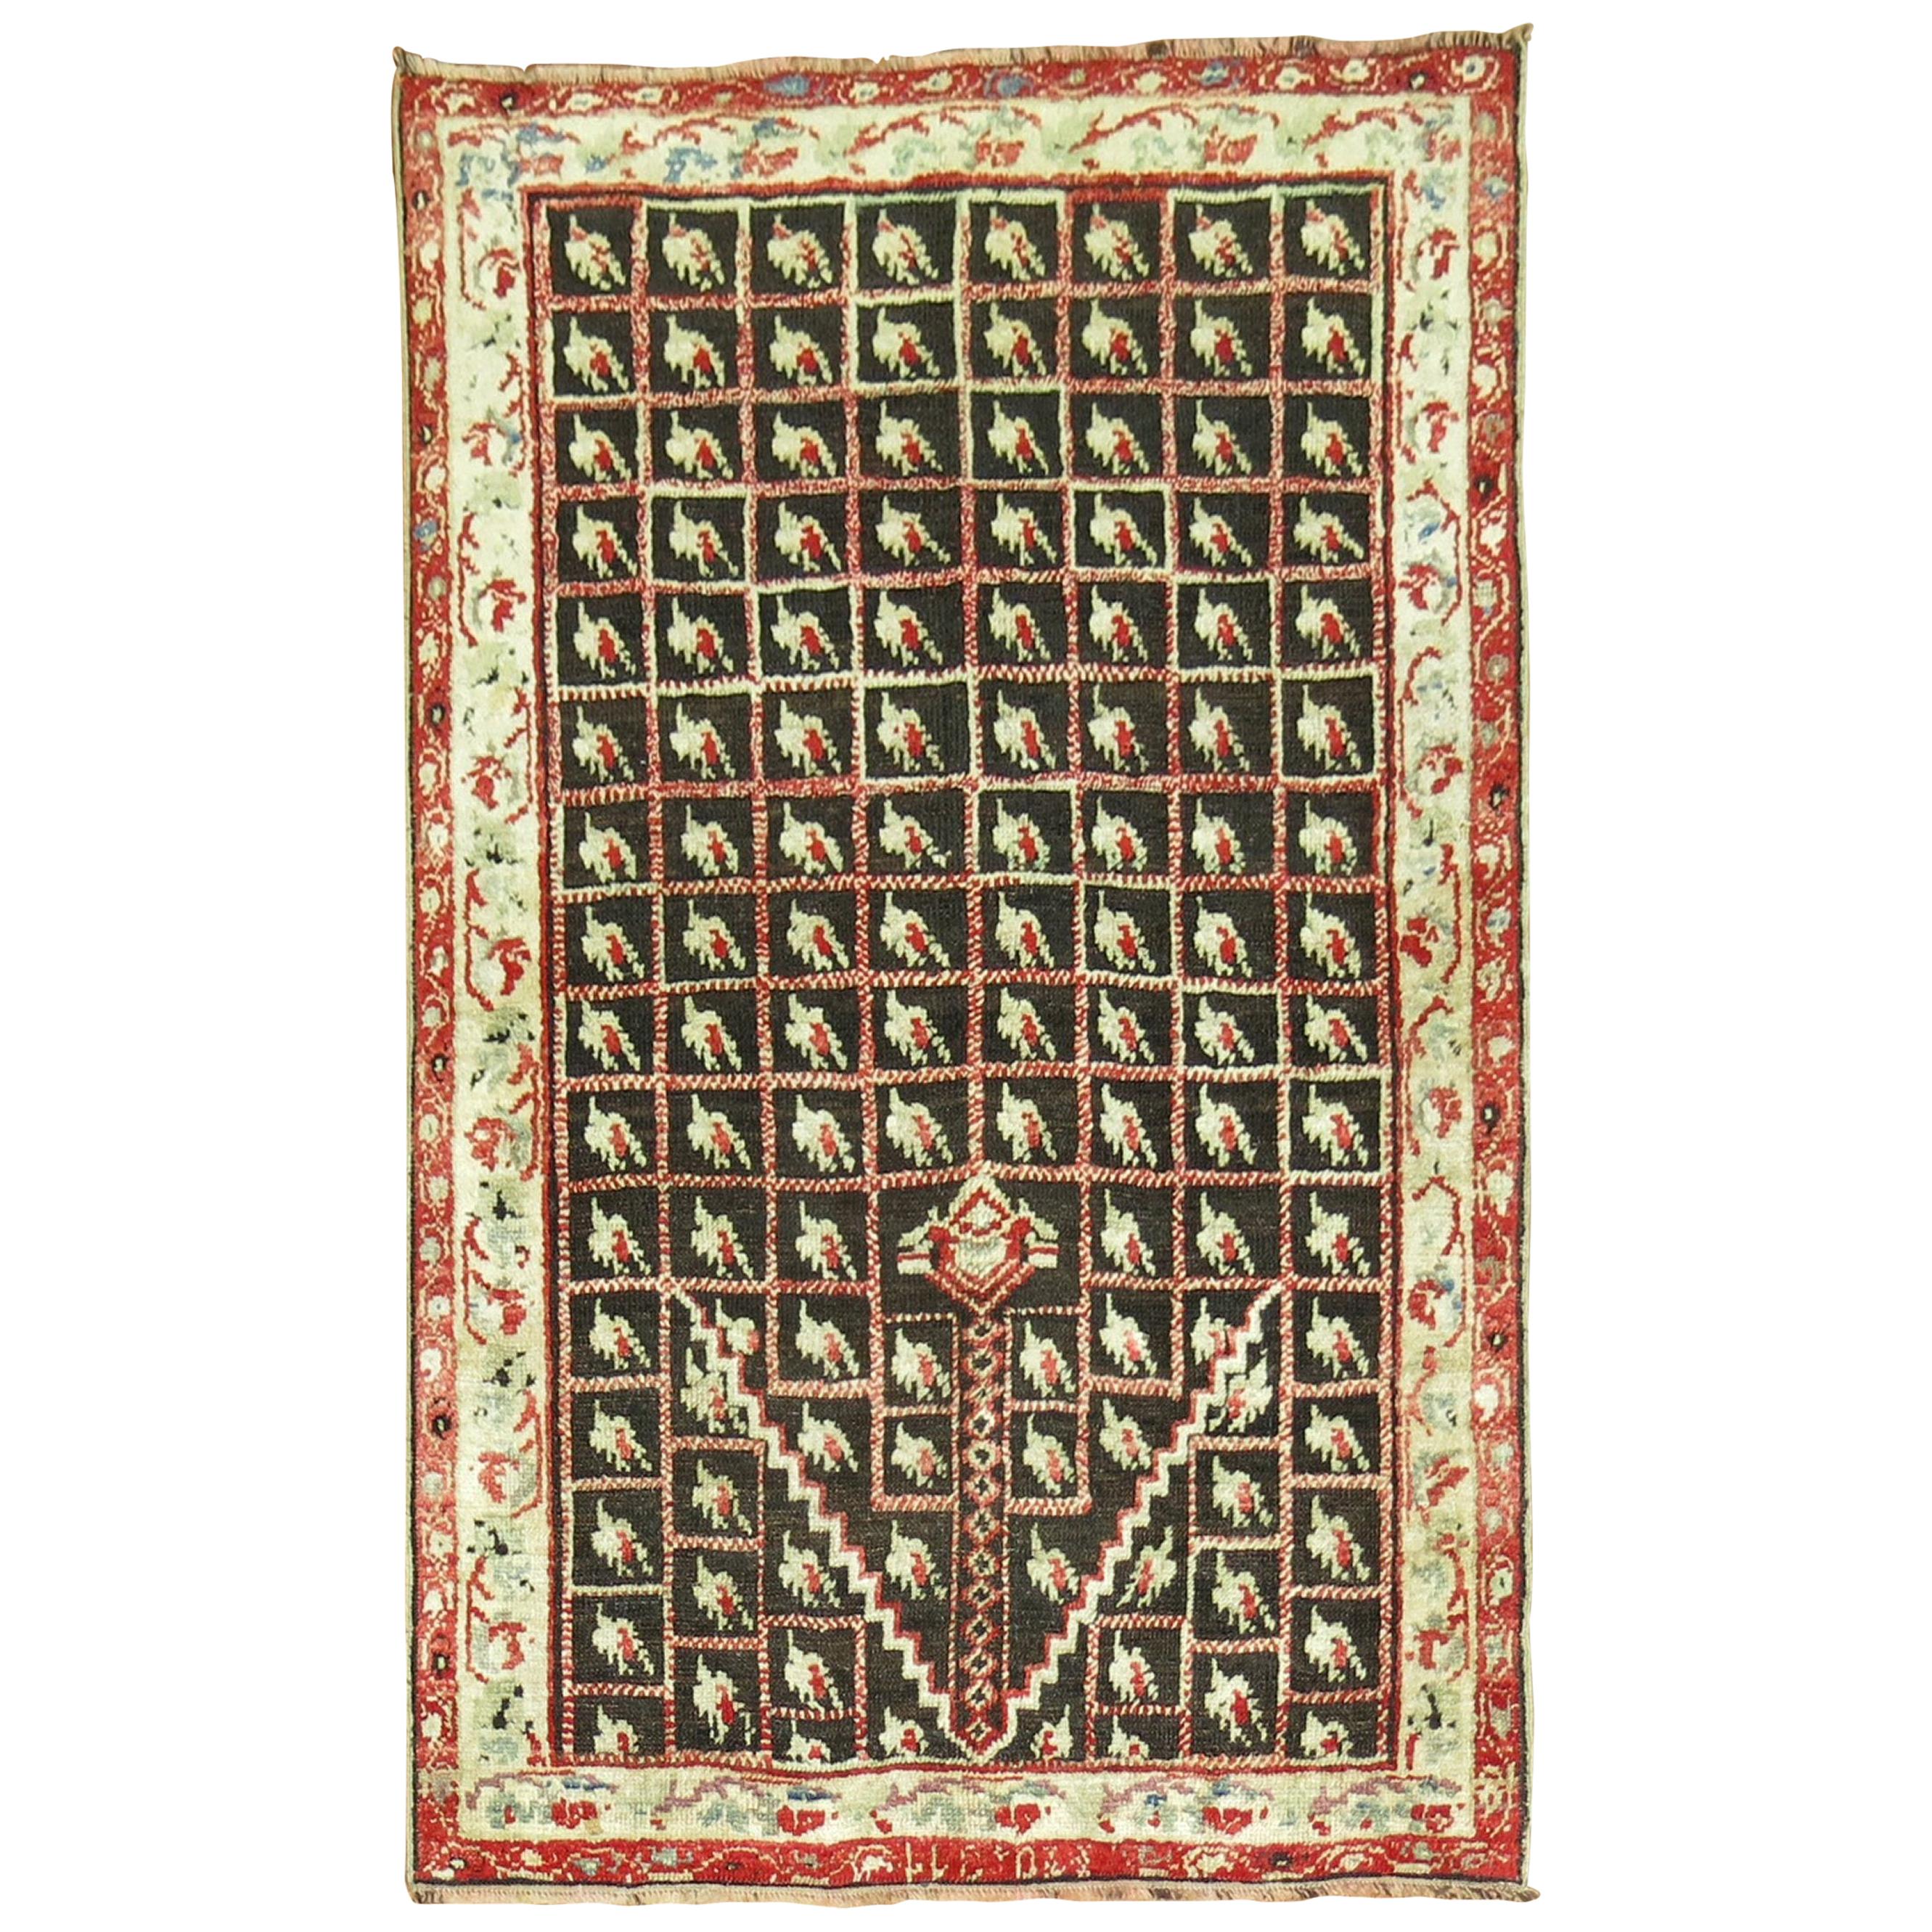 Brown Early 20th Century Antique Turkish Ghiordes Rug